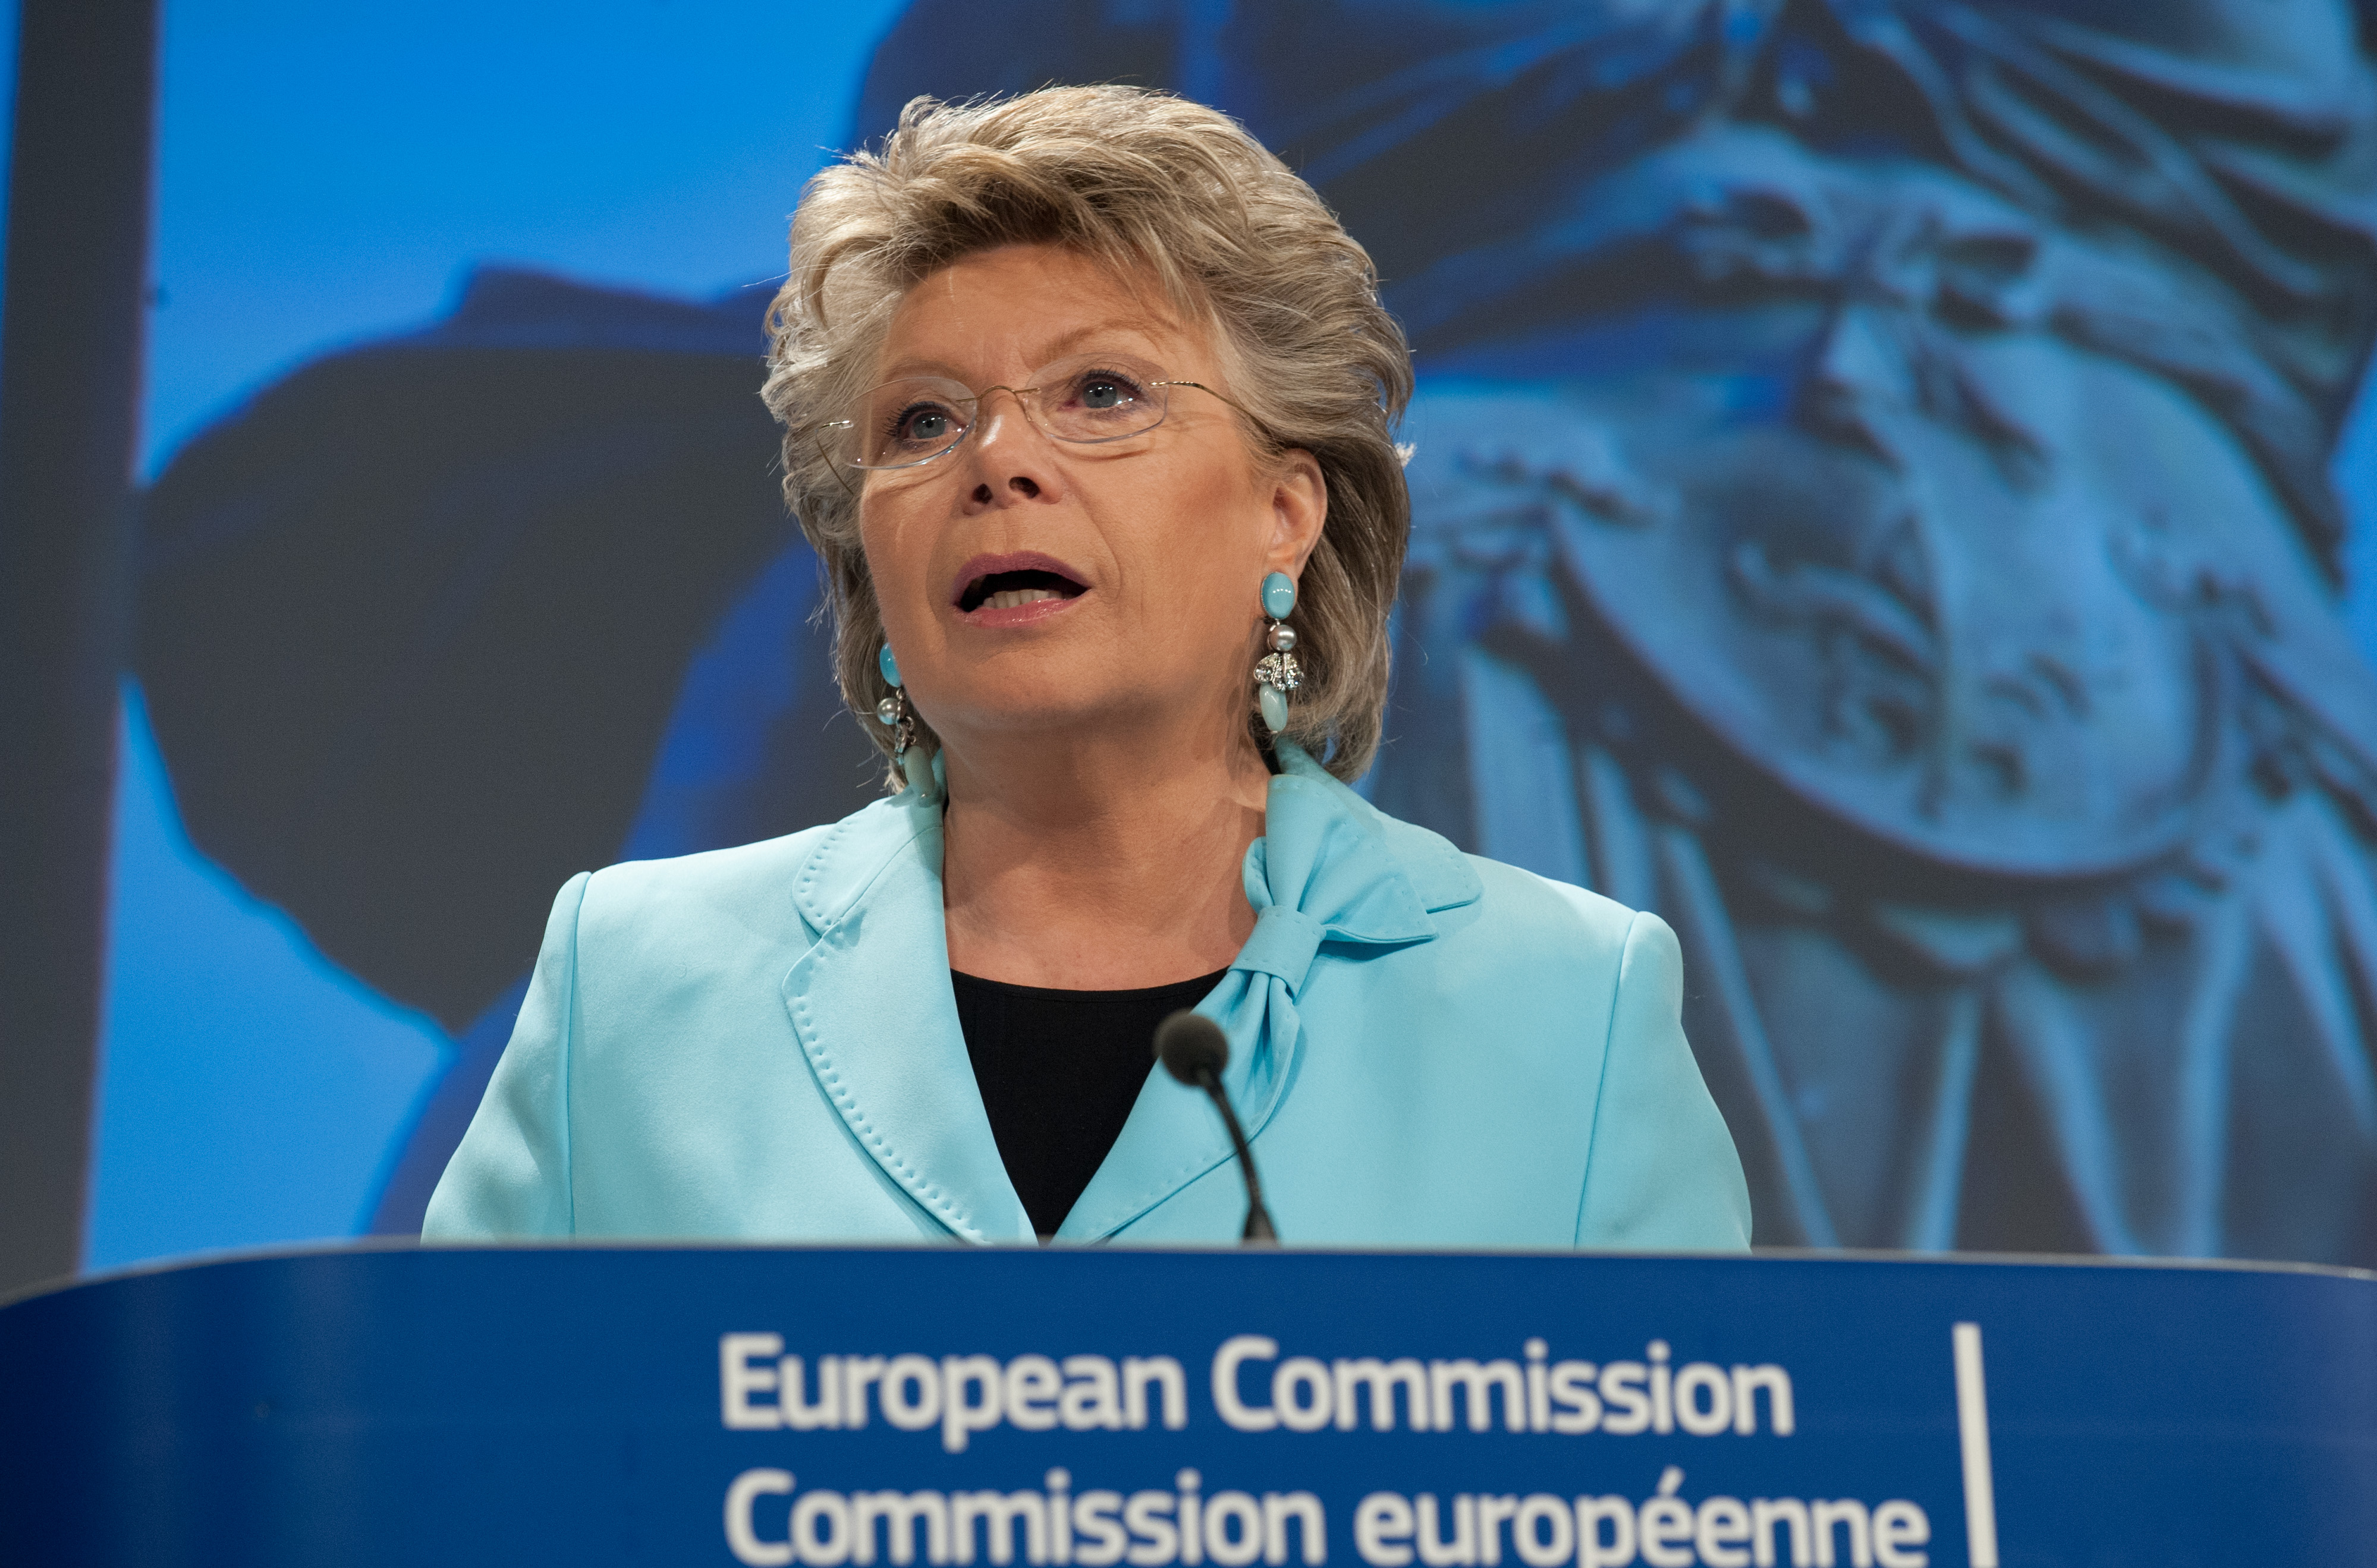 Former European Comission vice president Viviane Reding (by EBS)